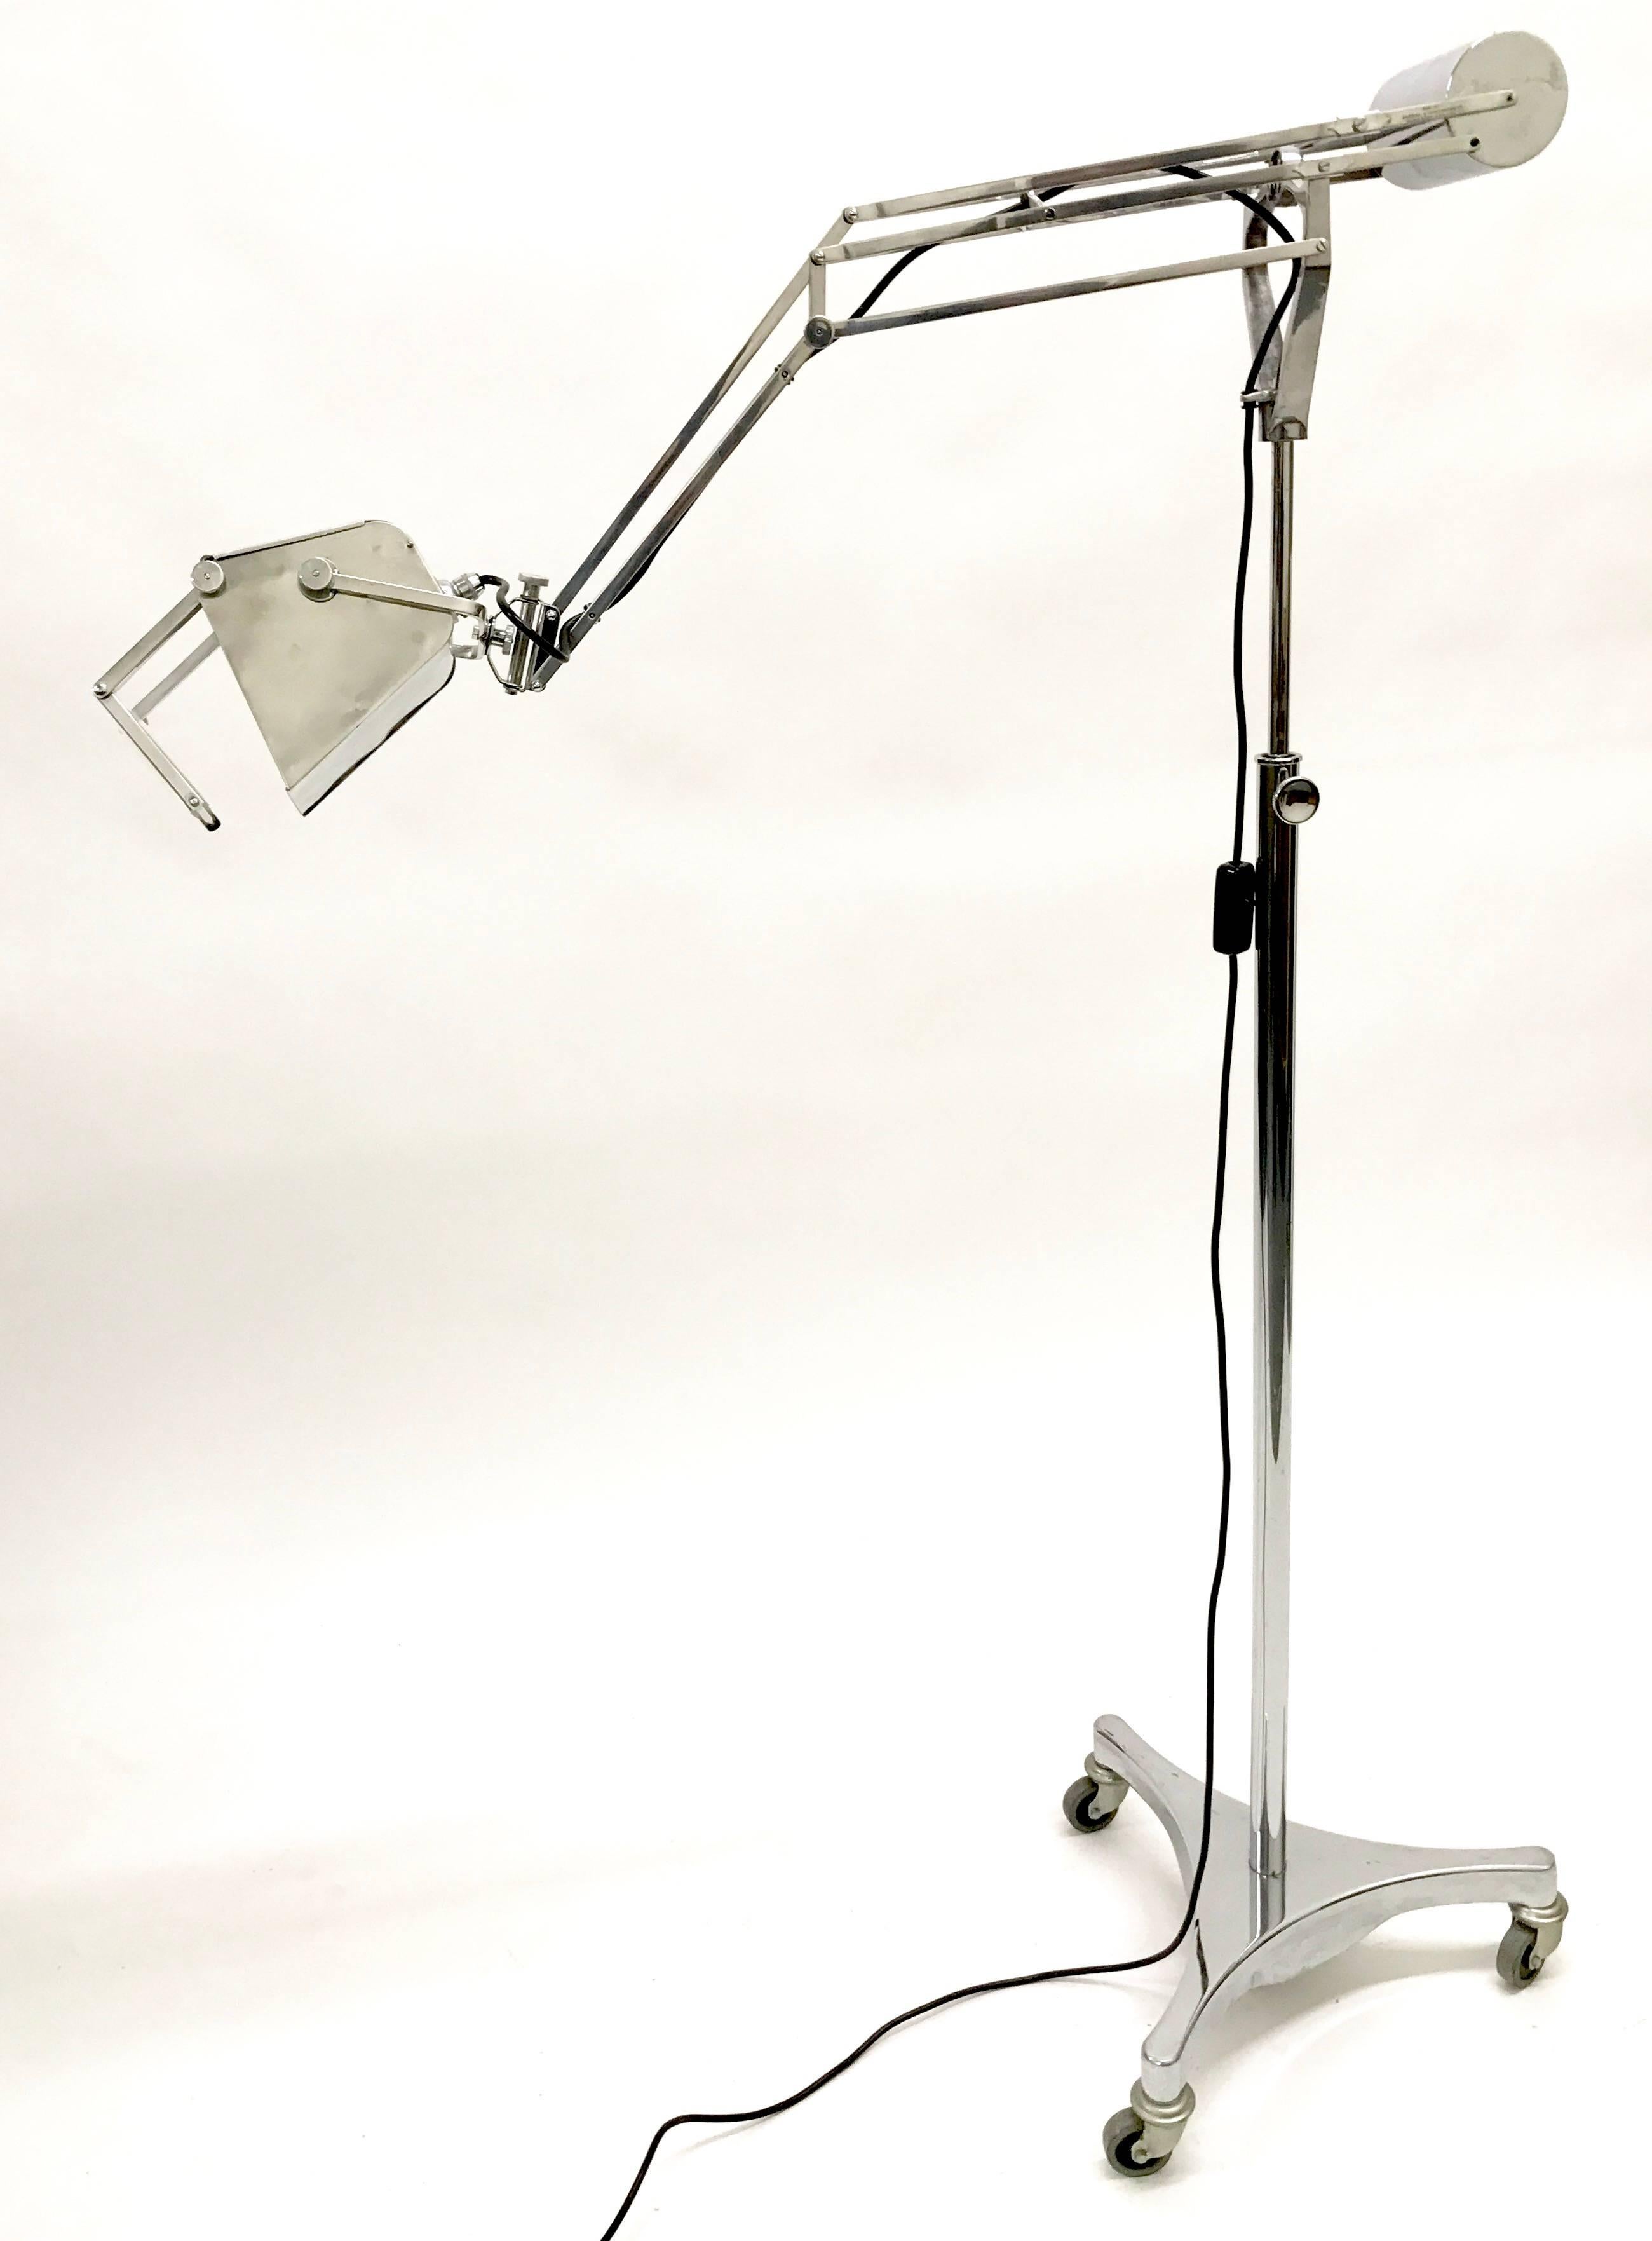 Hadrill and Horstmann counter balance trolley floor lamp with a magnifying lens, 1950s.